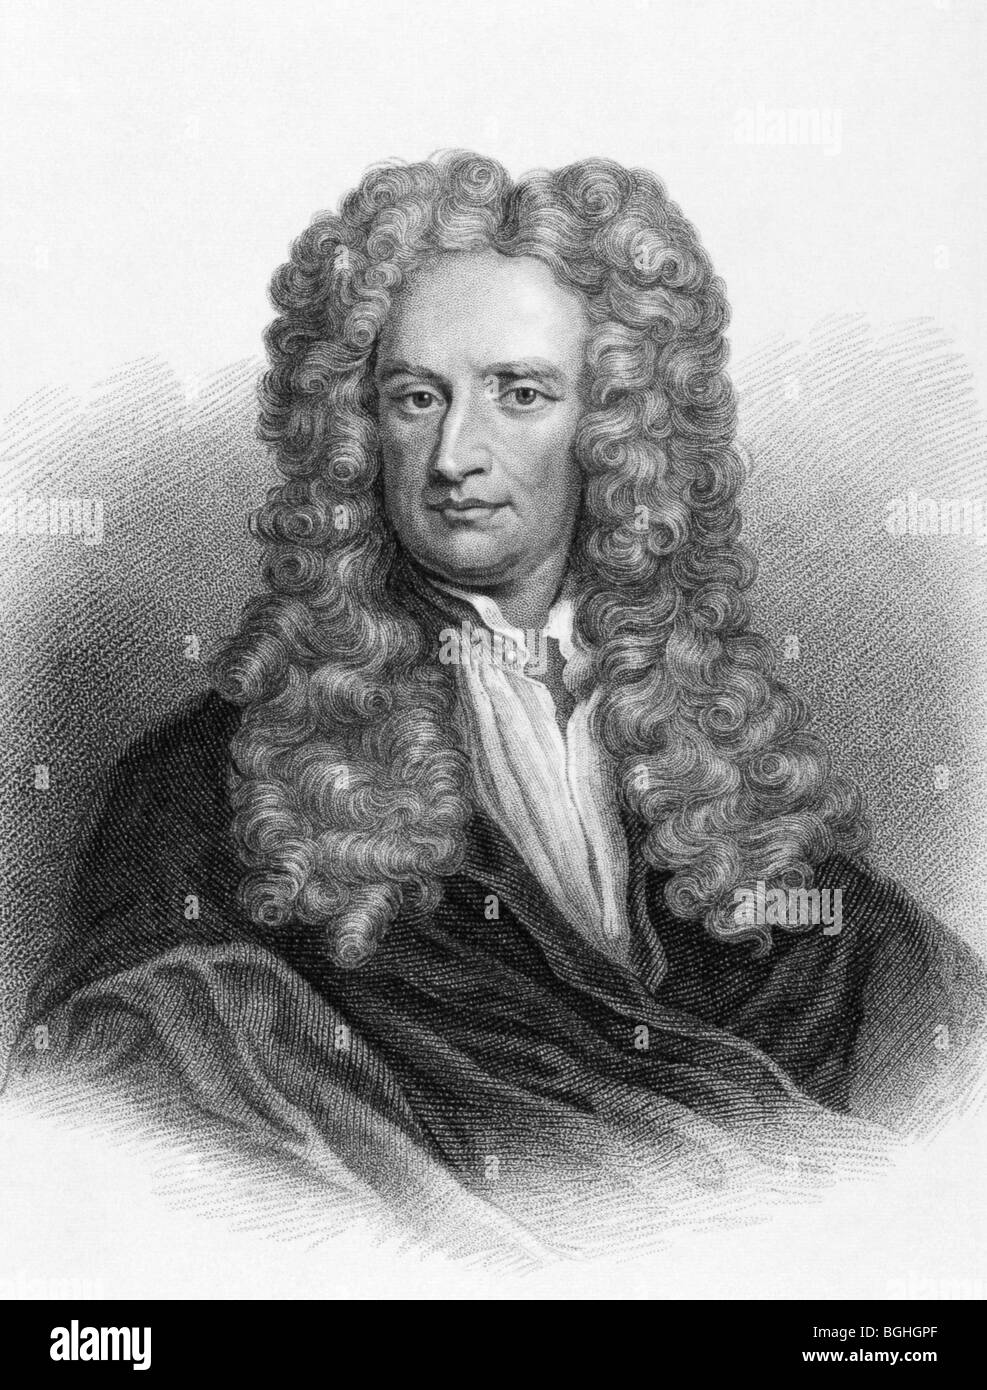 Isaac Newton on engraving from the 1800s. One of the most influential scientists in history. Stock Photo